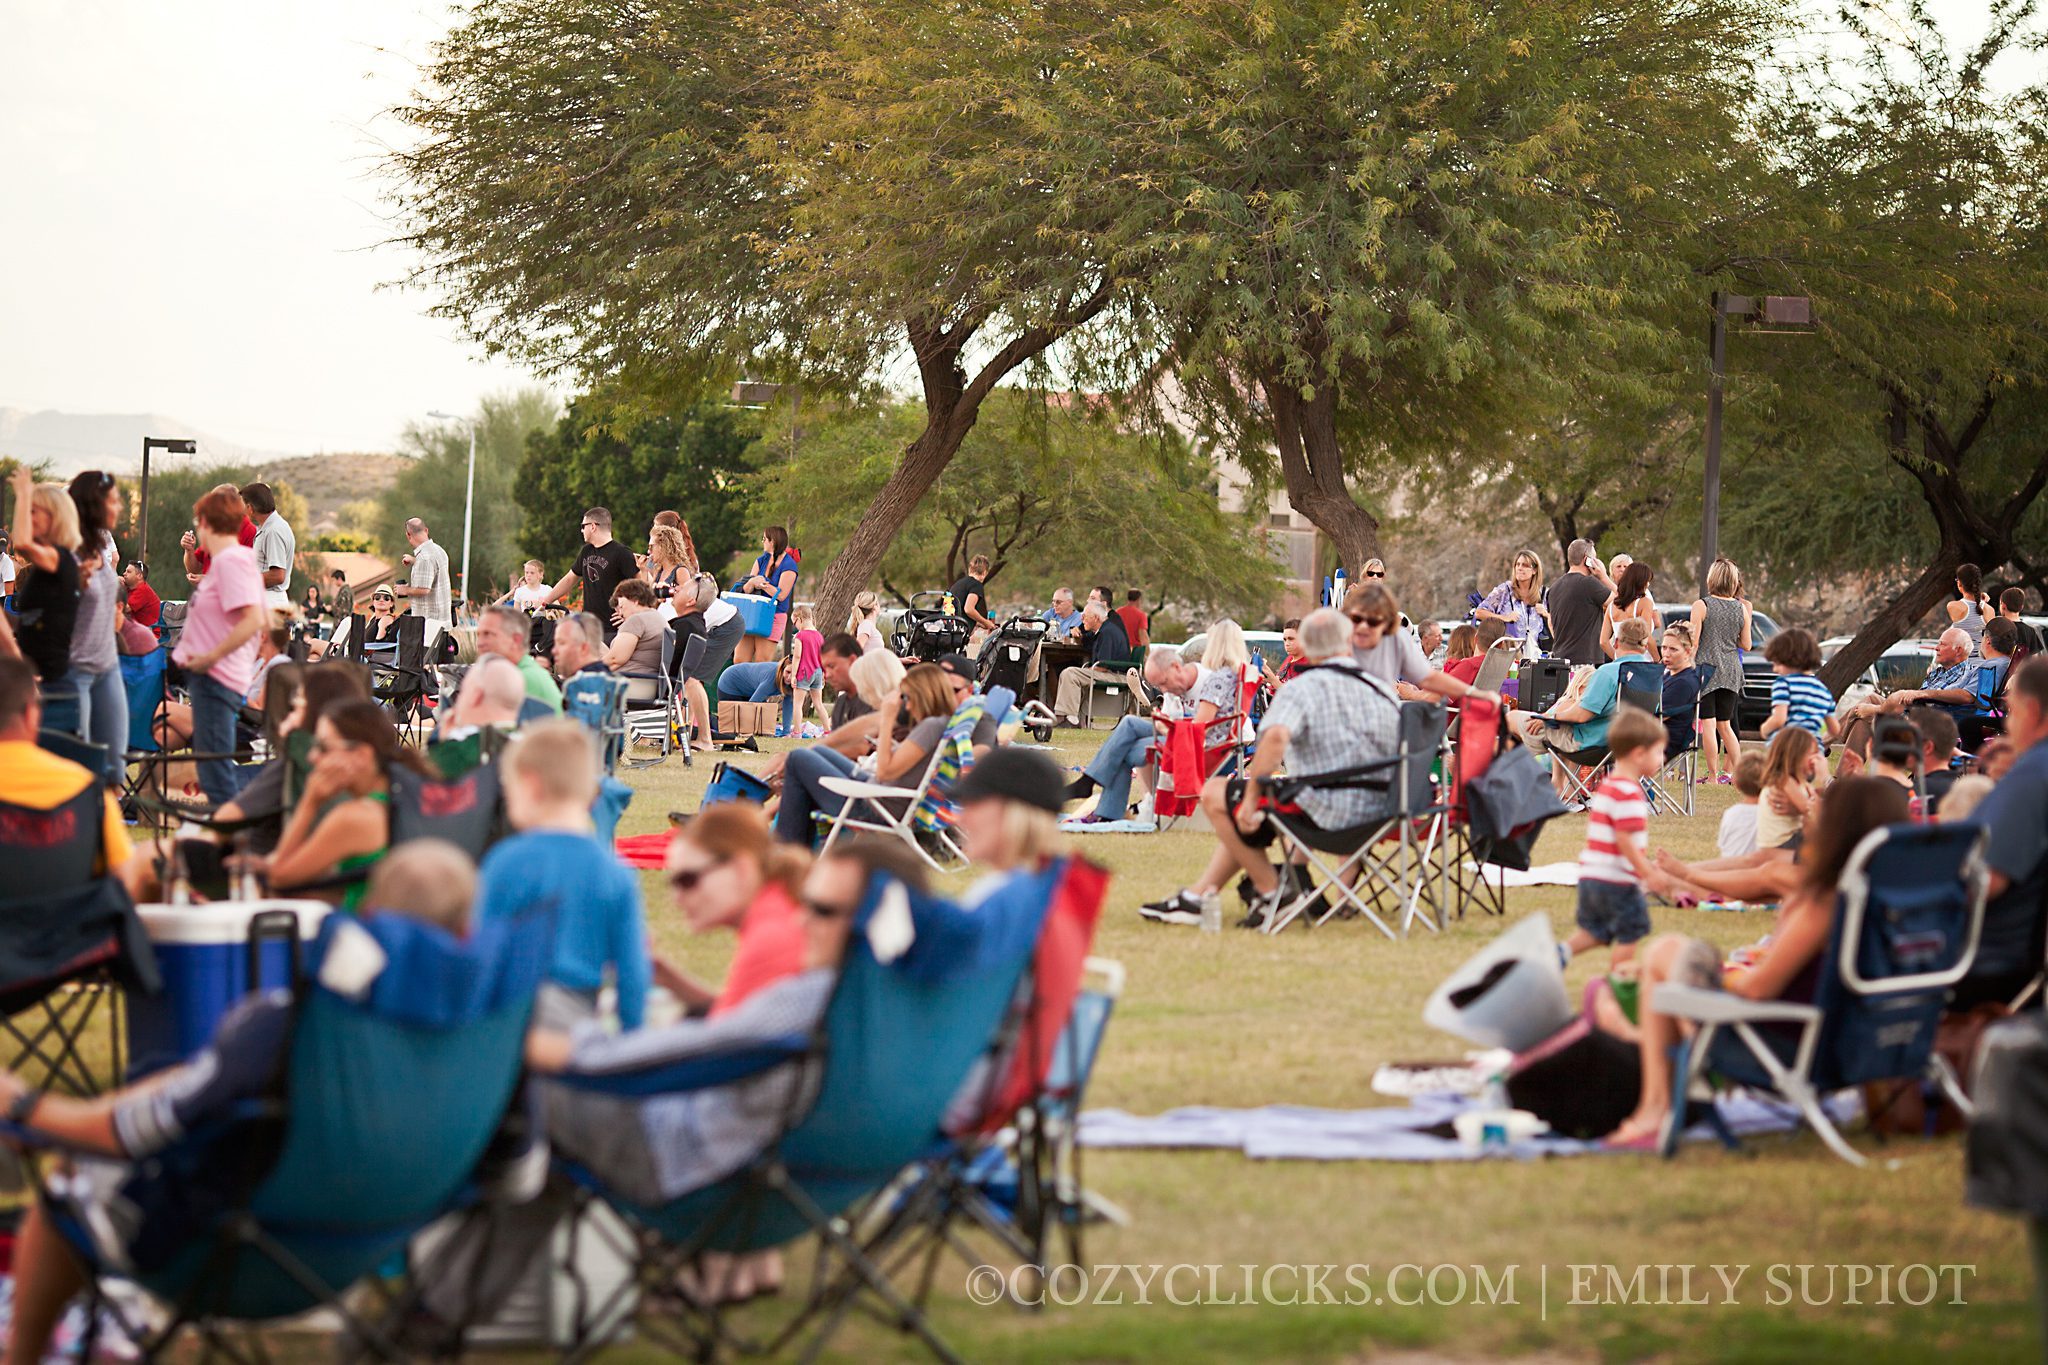 Ahwatukee Photography Concerts in the PArk at Desert Foothills Park on Chandler Blvd